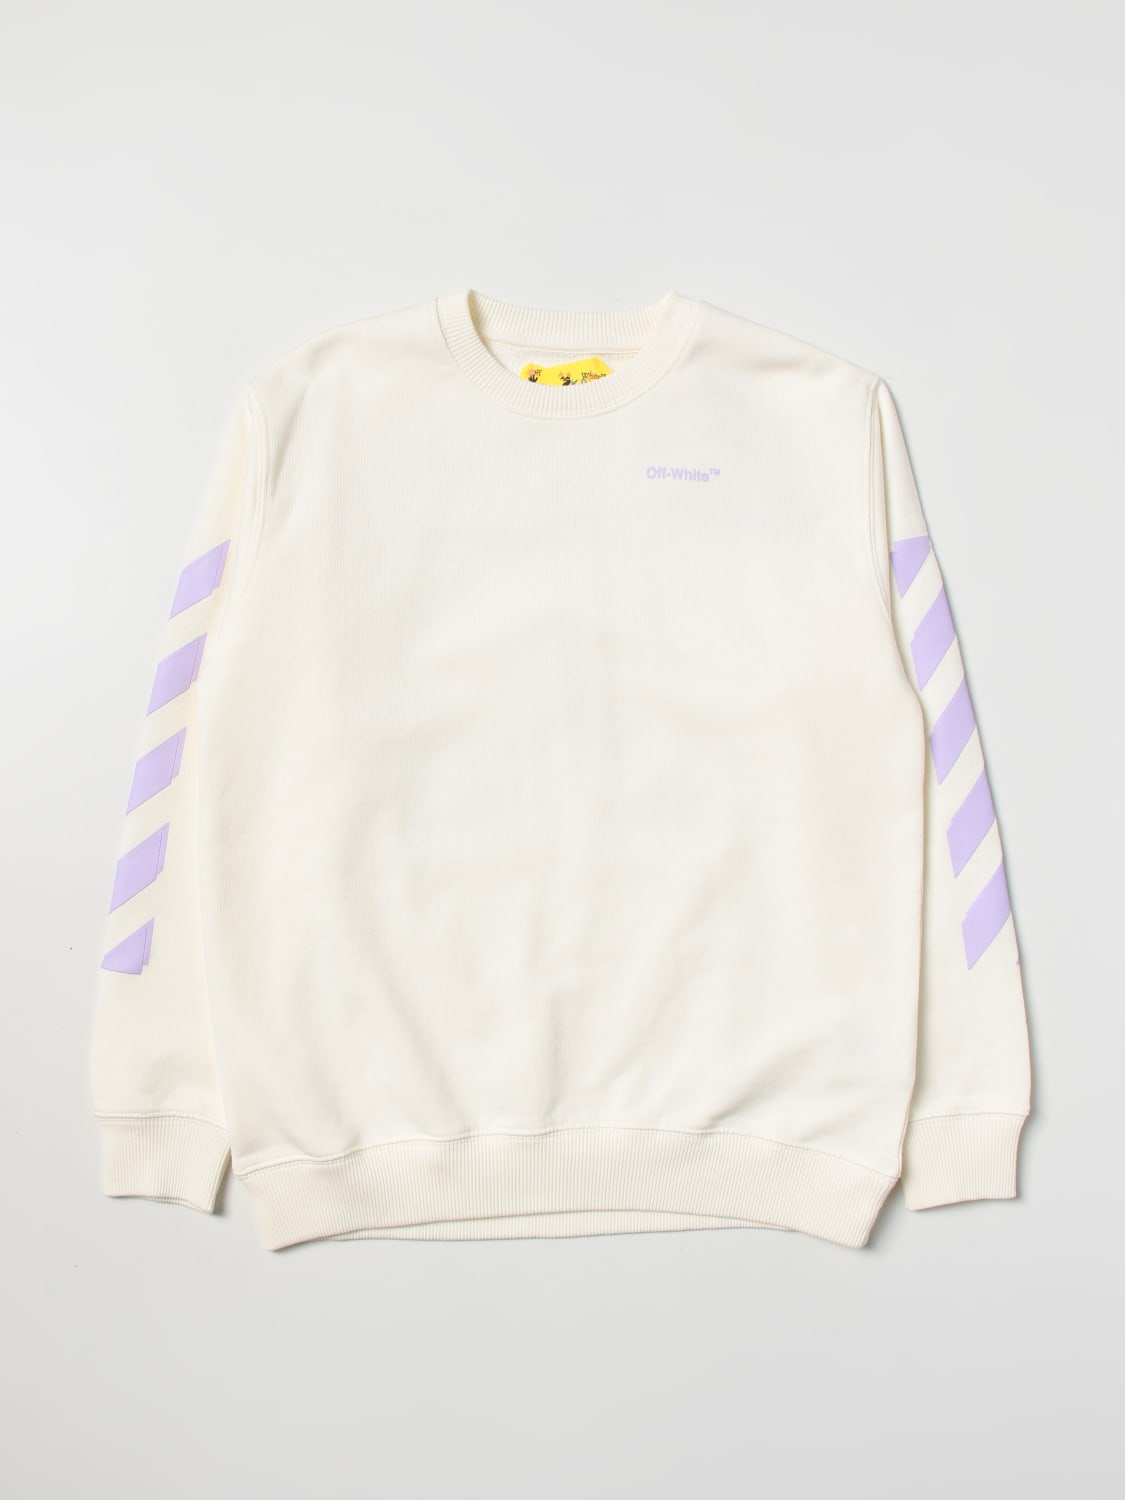 OFF-WHITE: sweatshirt - White | Off-White sweater OGBA001S23FLE001 online on GIGLIO.COM